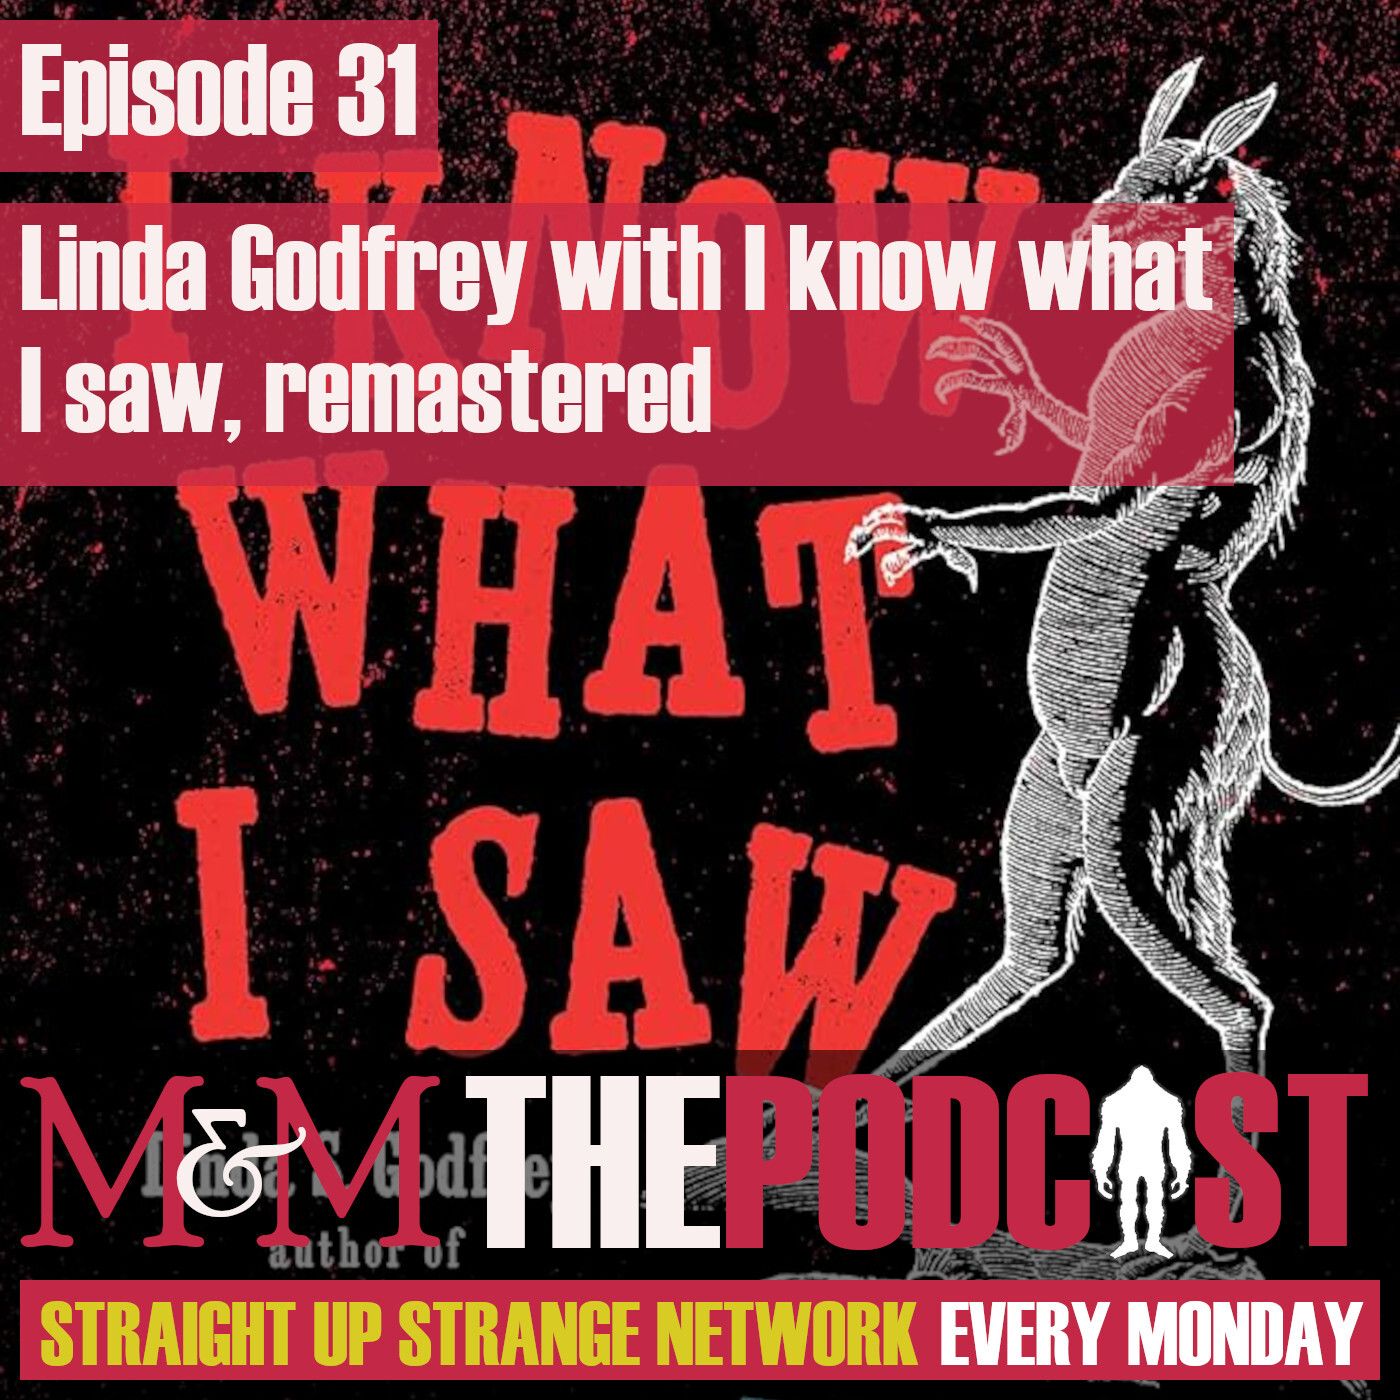 Mysteries and Monsters: Episode 31 I Know What I Saw with Linda Godfrey (remastered)